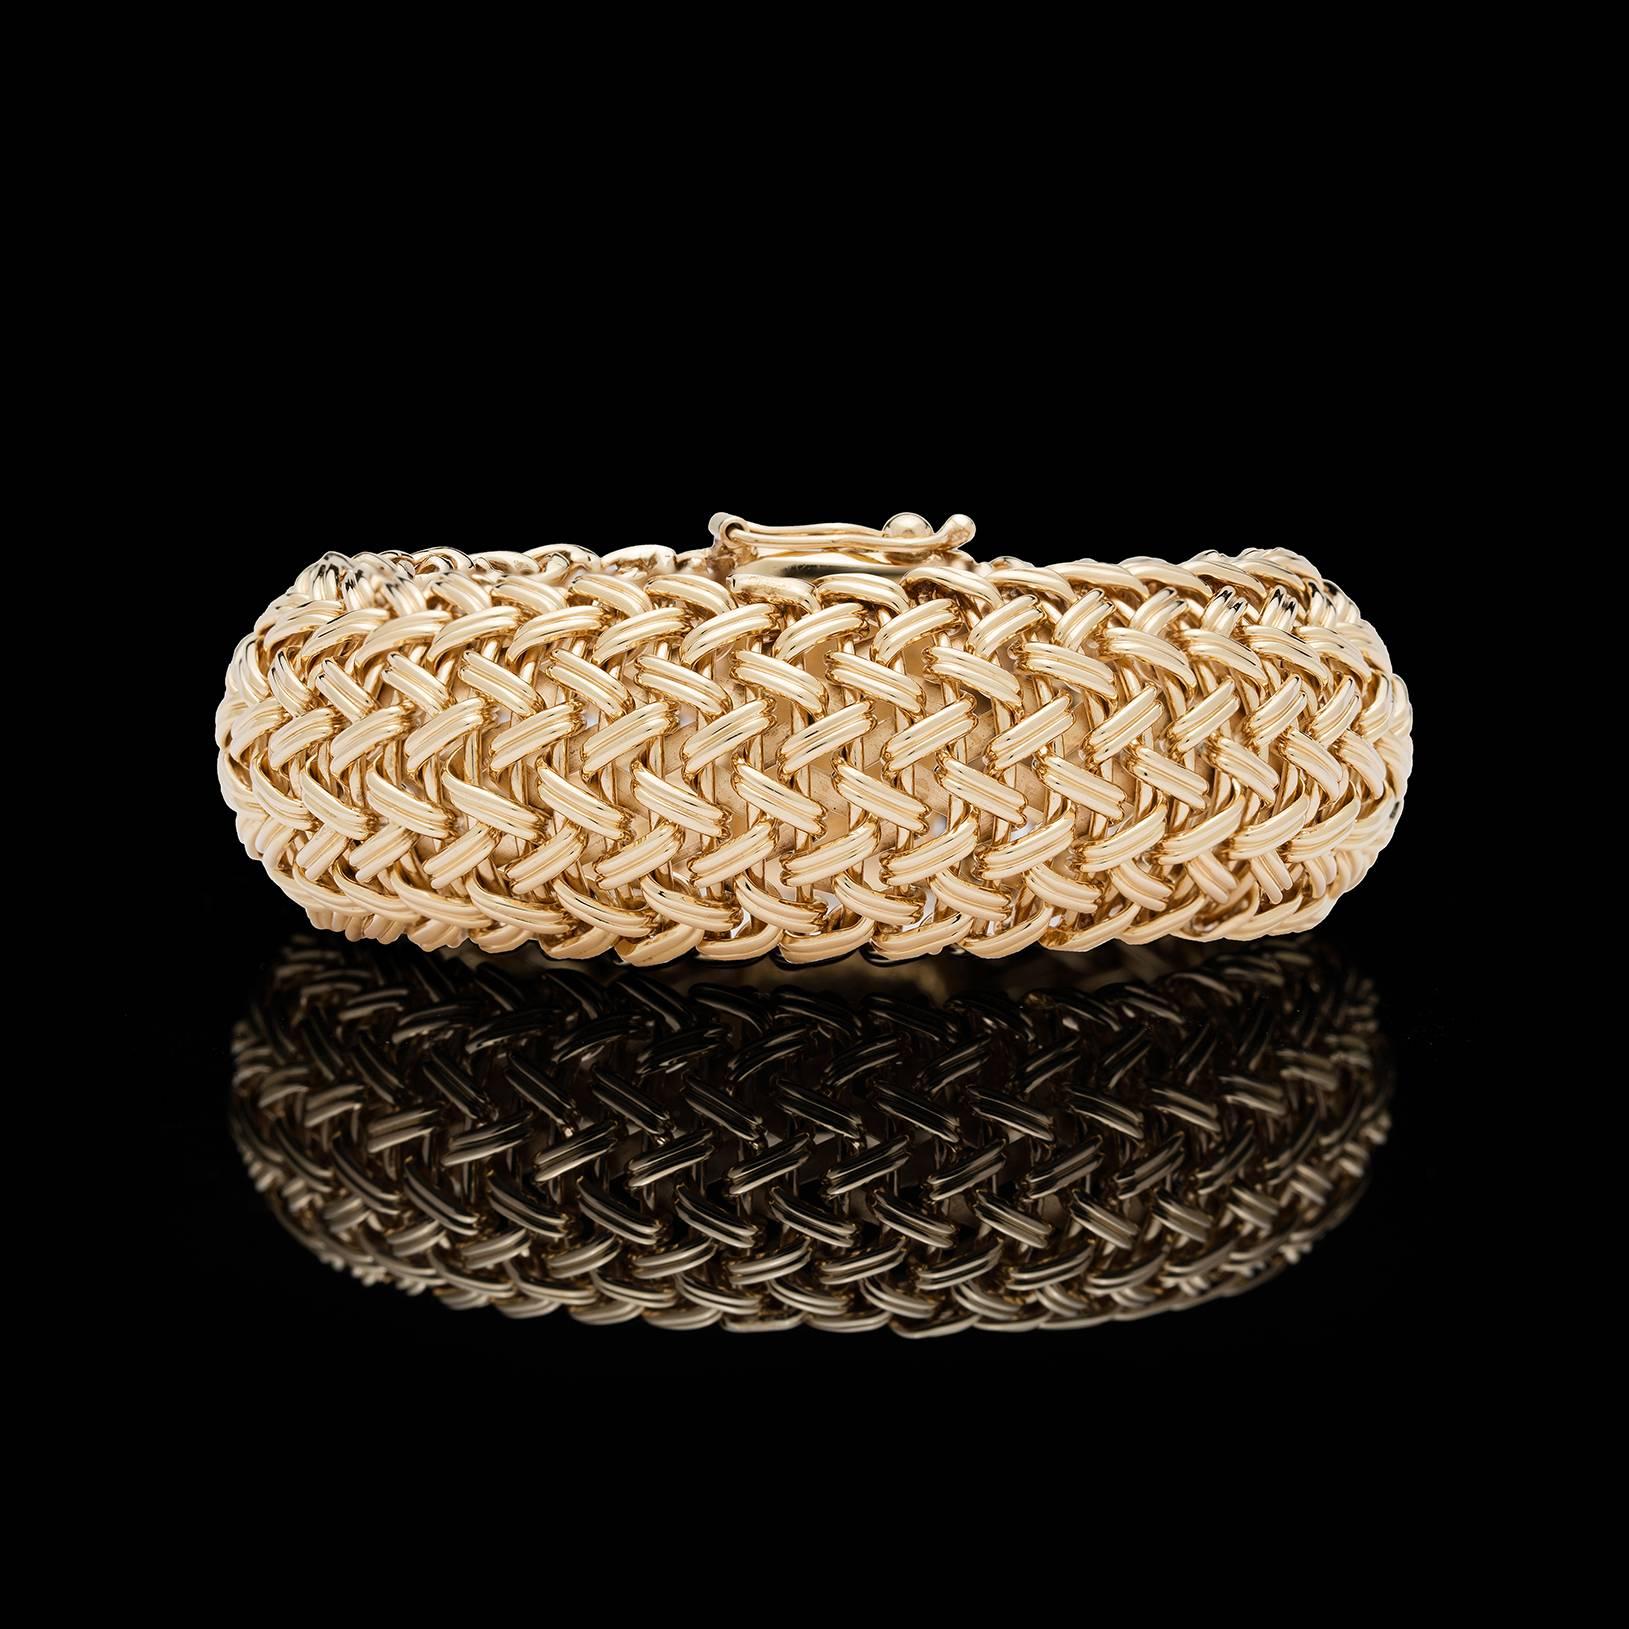 Eye-catching 14k yellow gold woven style wide bangle bracelet. Length is 7 inches, and width is about 1 inch. Total weight of the bracelet is 87 grams. This substantial piece will be a wardrobe favorite!  